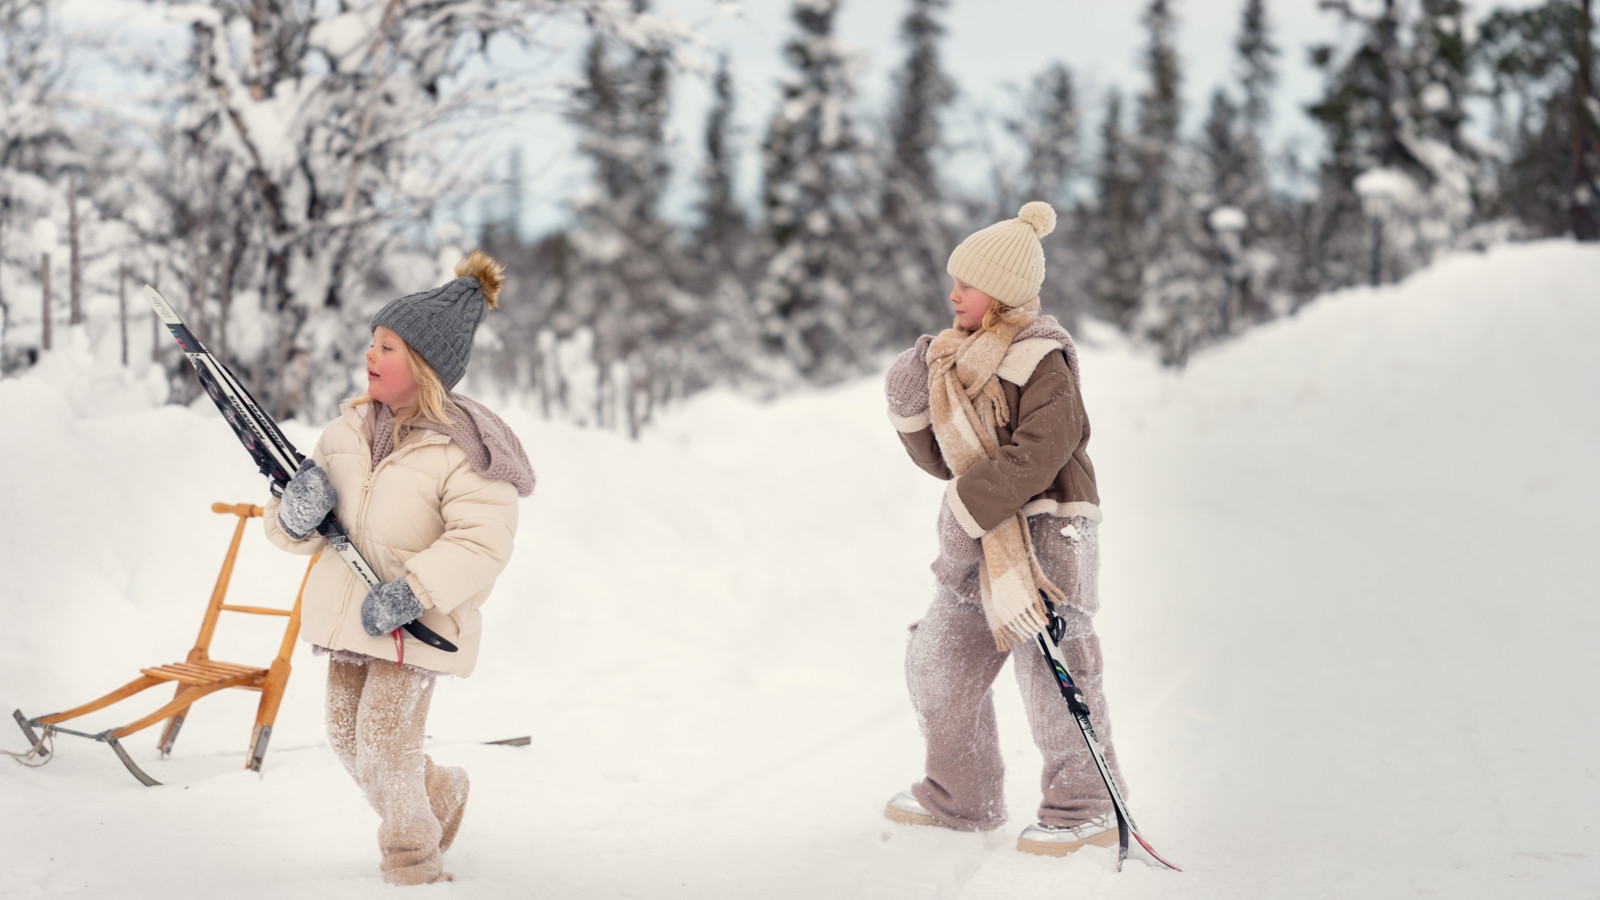 Children with skis in the snow